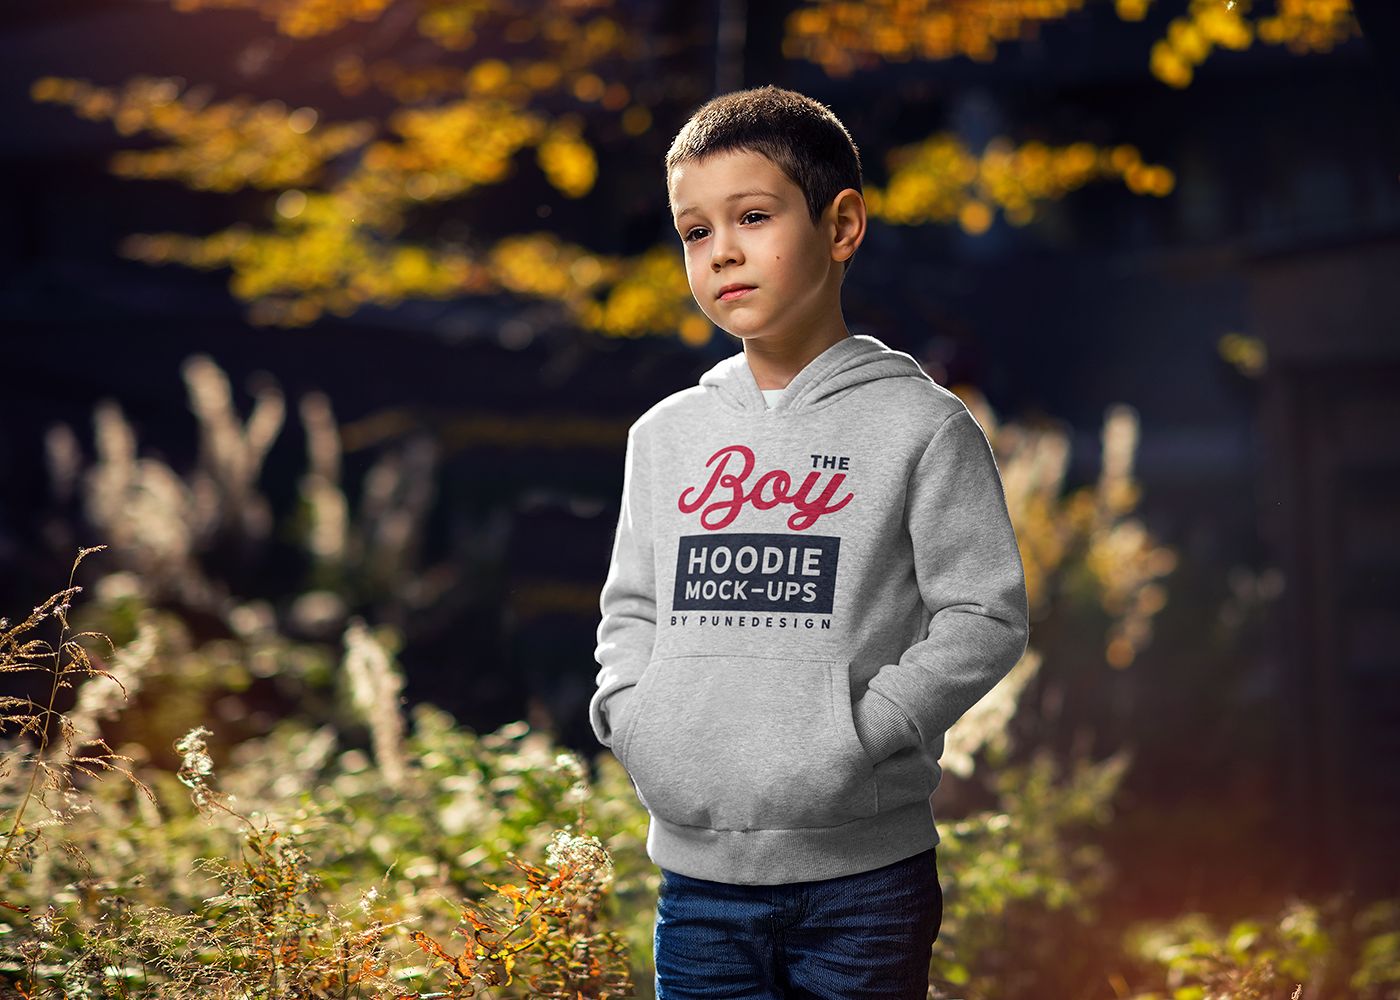 Boy_Hoodie_Mock-Up_by_PuneDesign-03